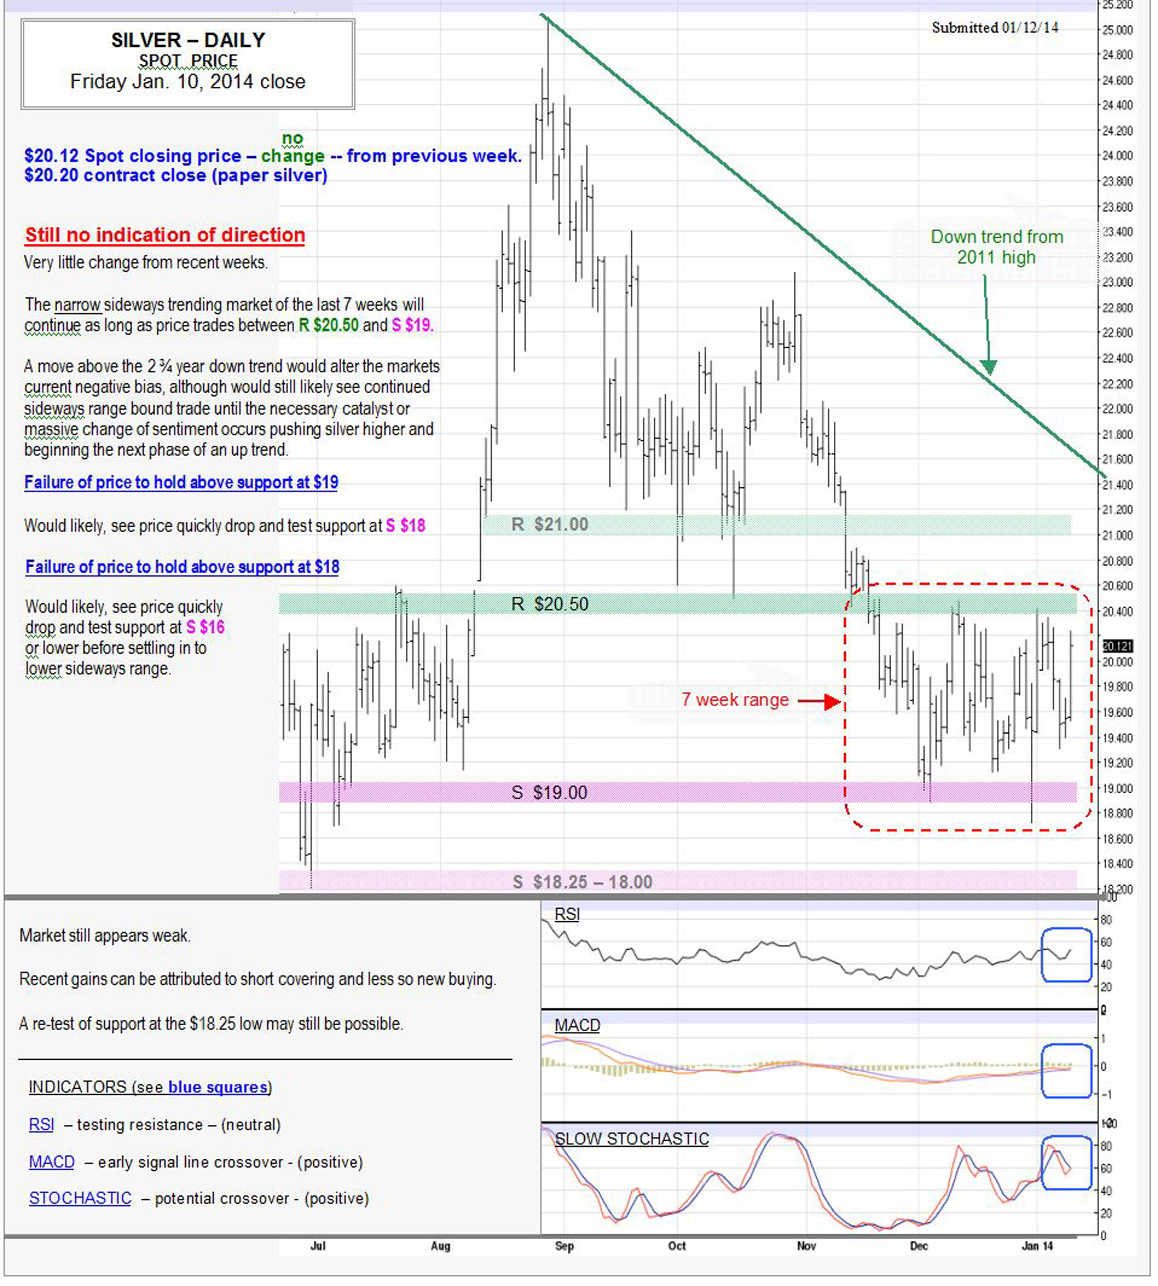 Jan 10, 2014 chart & commentary